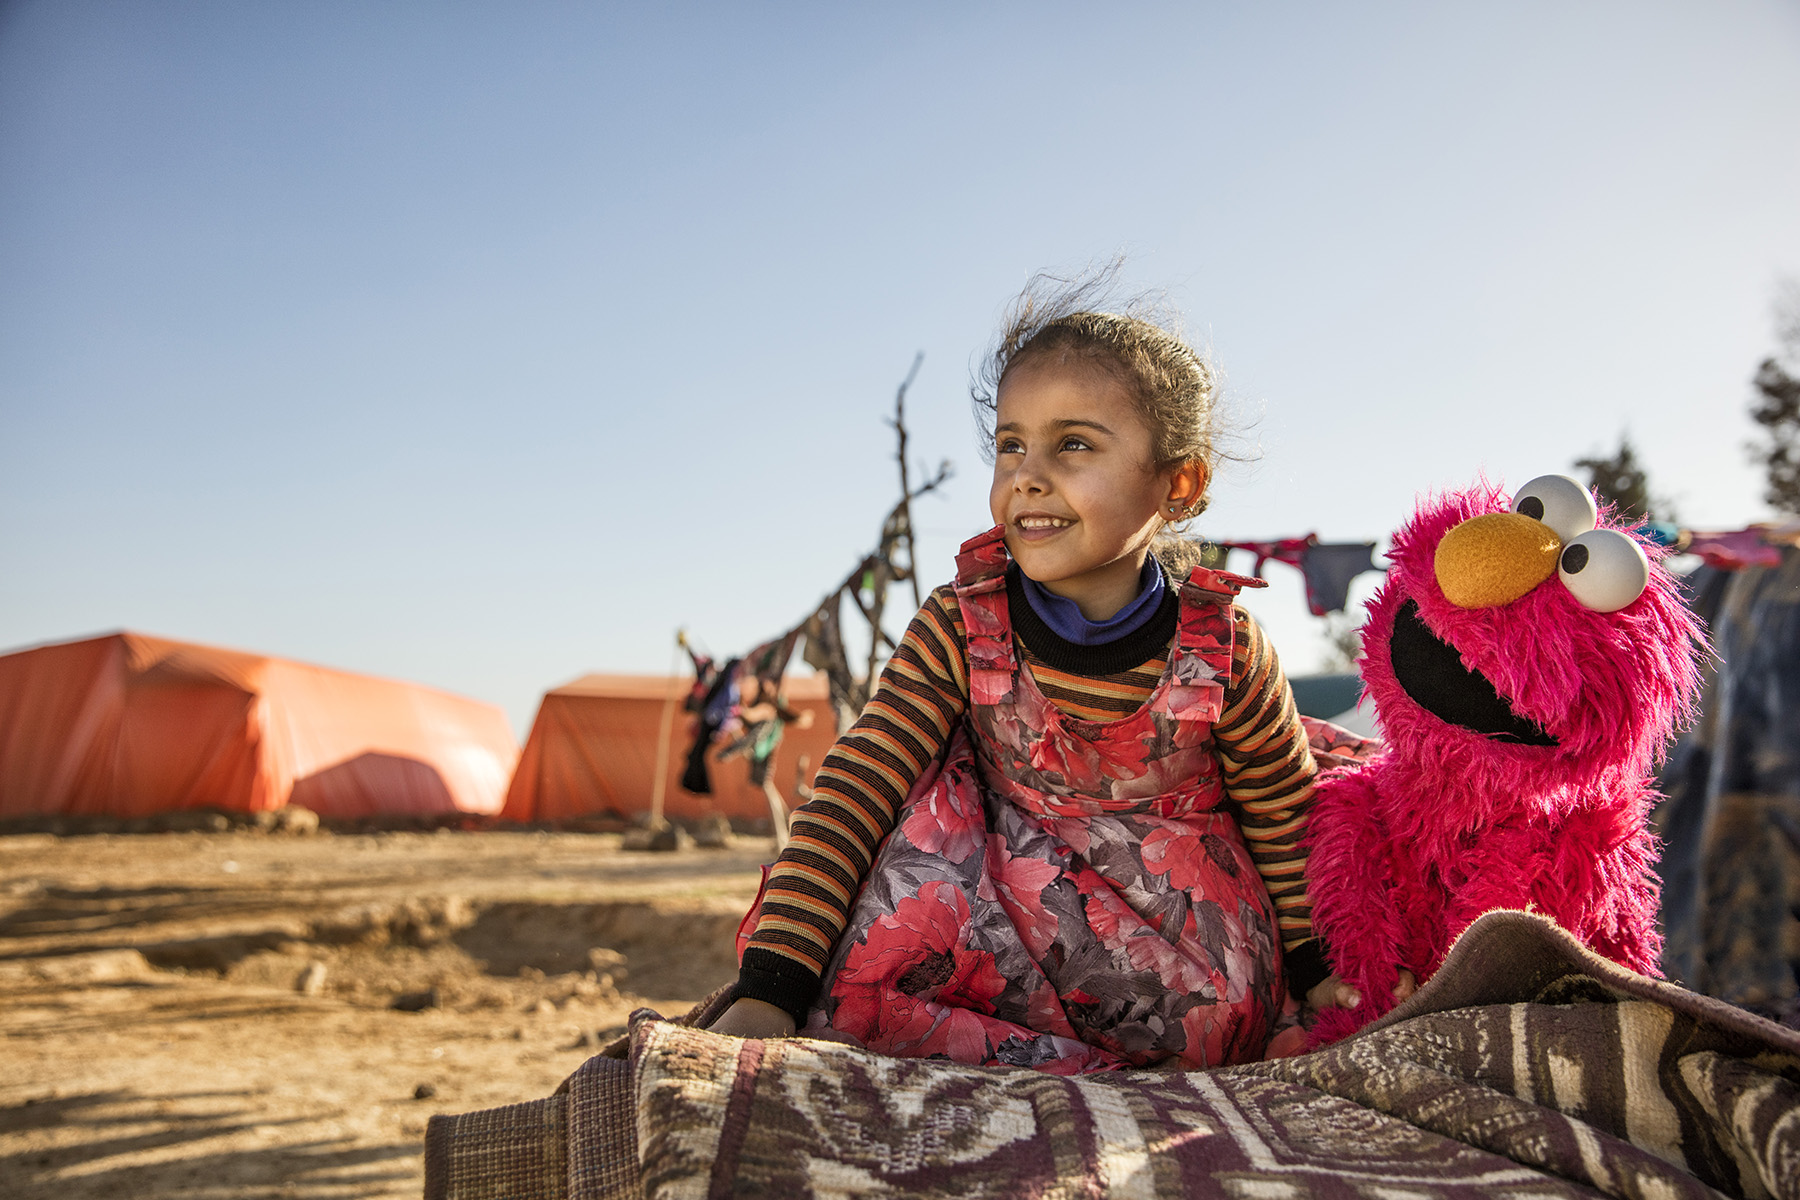 Sesame Workshop is working with the International Rescue Committee (IRC) to bring hope in the form of education to refugee children. 